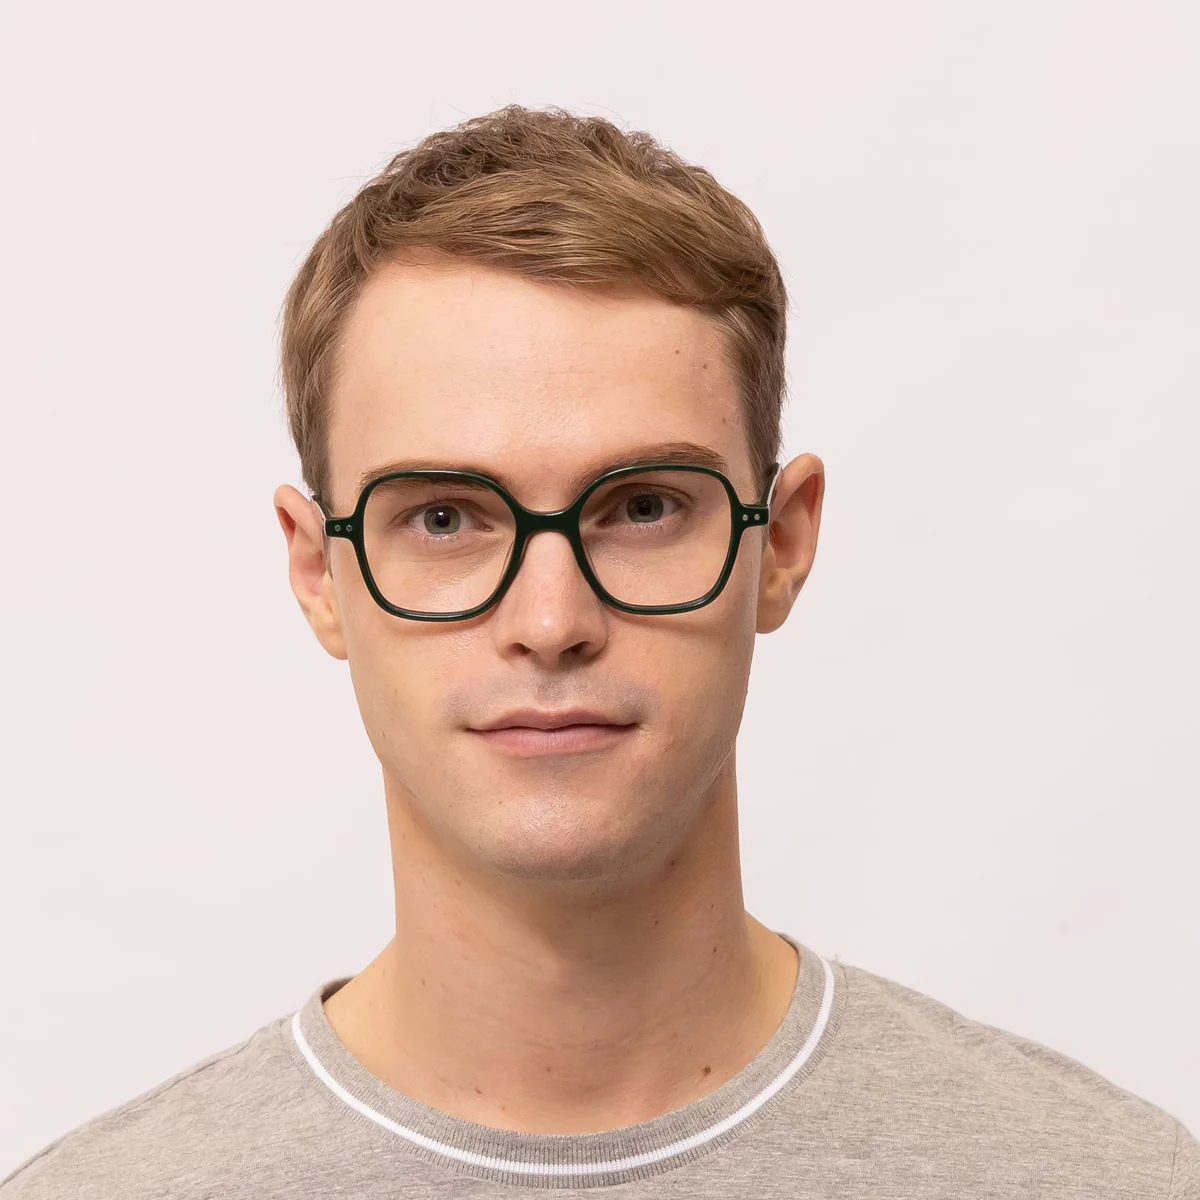 man wears oversized square glasses that makes his eyes appear bigger